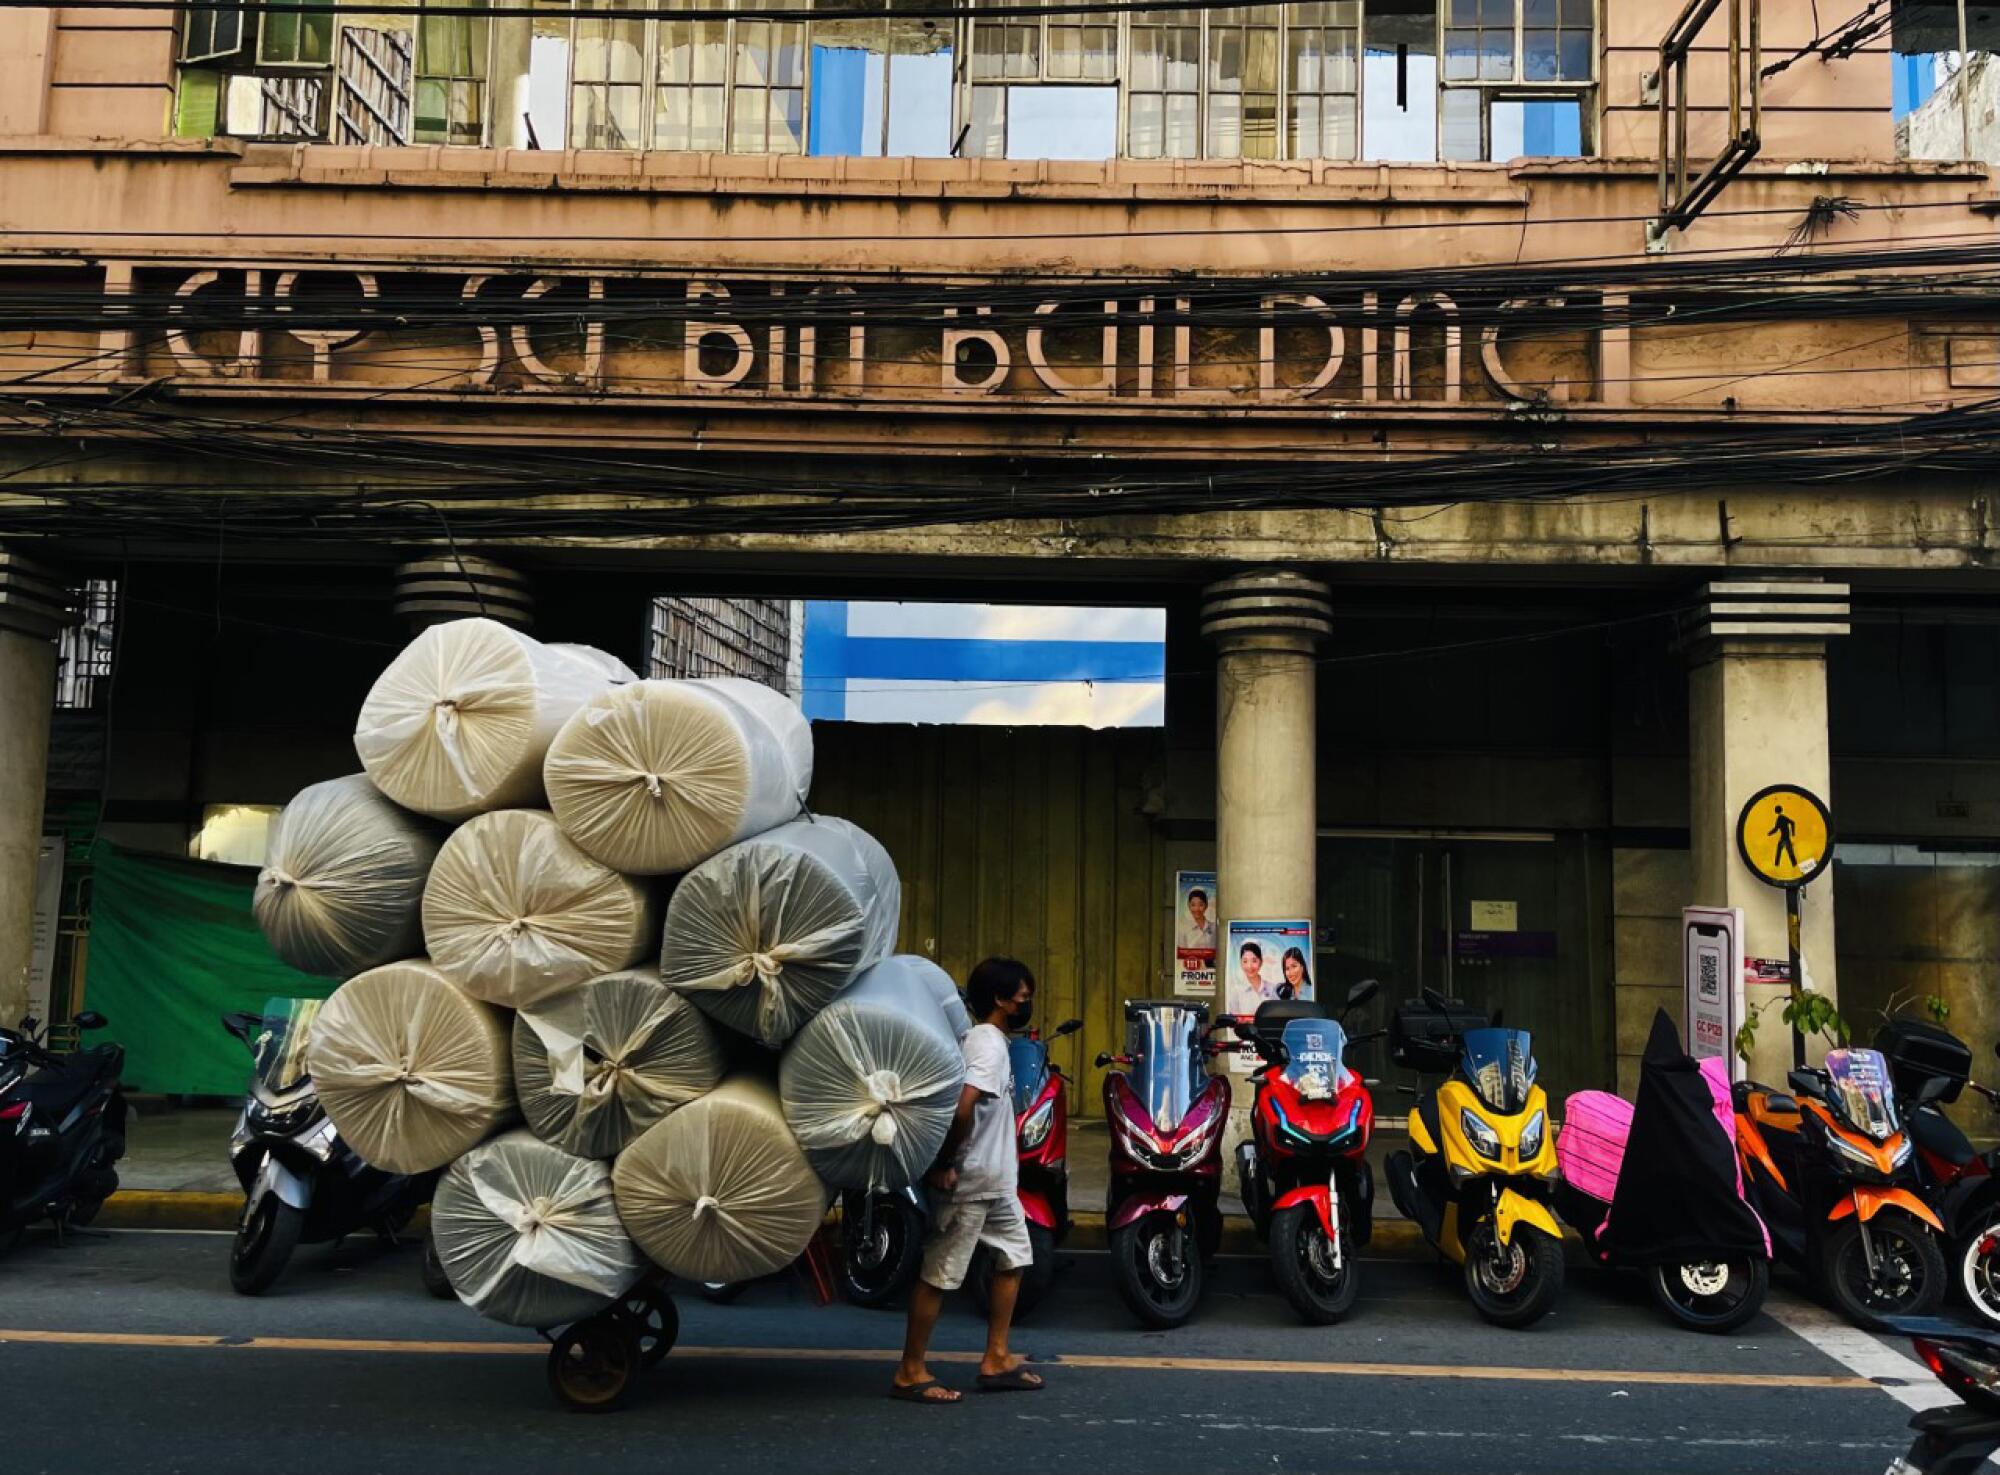 A laborer pulls a cart of rolled fabric past an old building with motor scooters parked in front.